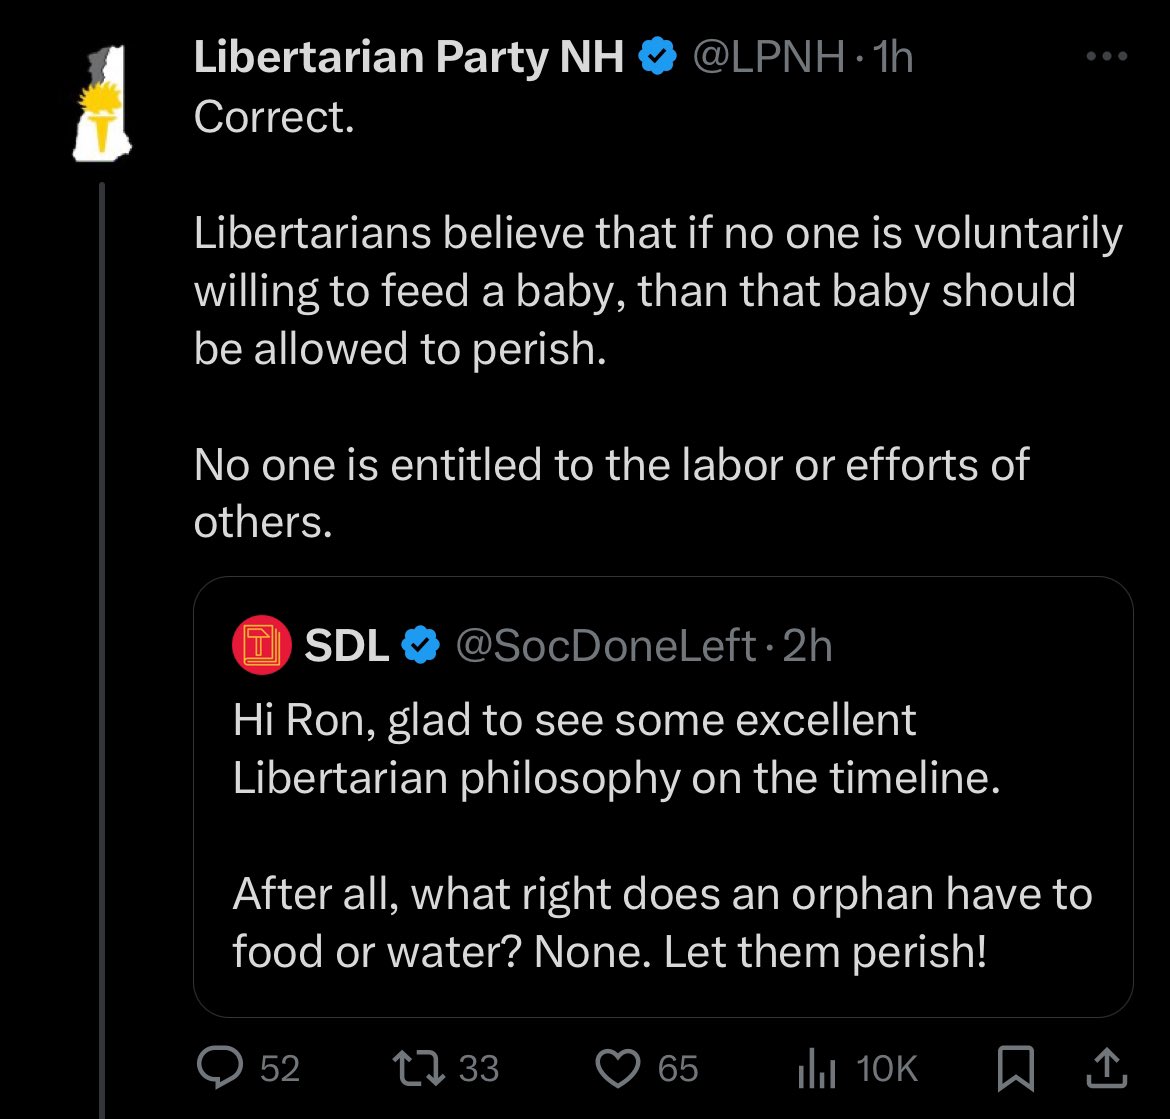 This is why I could never be a Libertarian. Like 70-80% of the time I’m nodding along, but that 20-30% of pure uncut batshittery is a major deal breaker